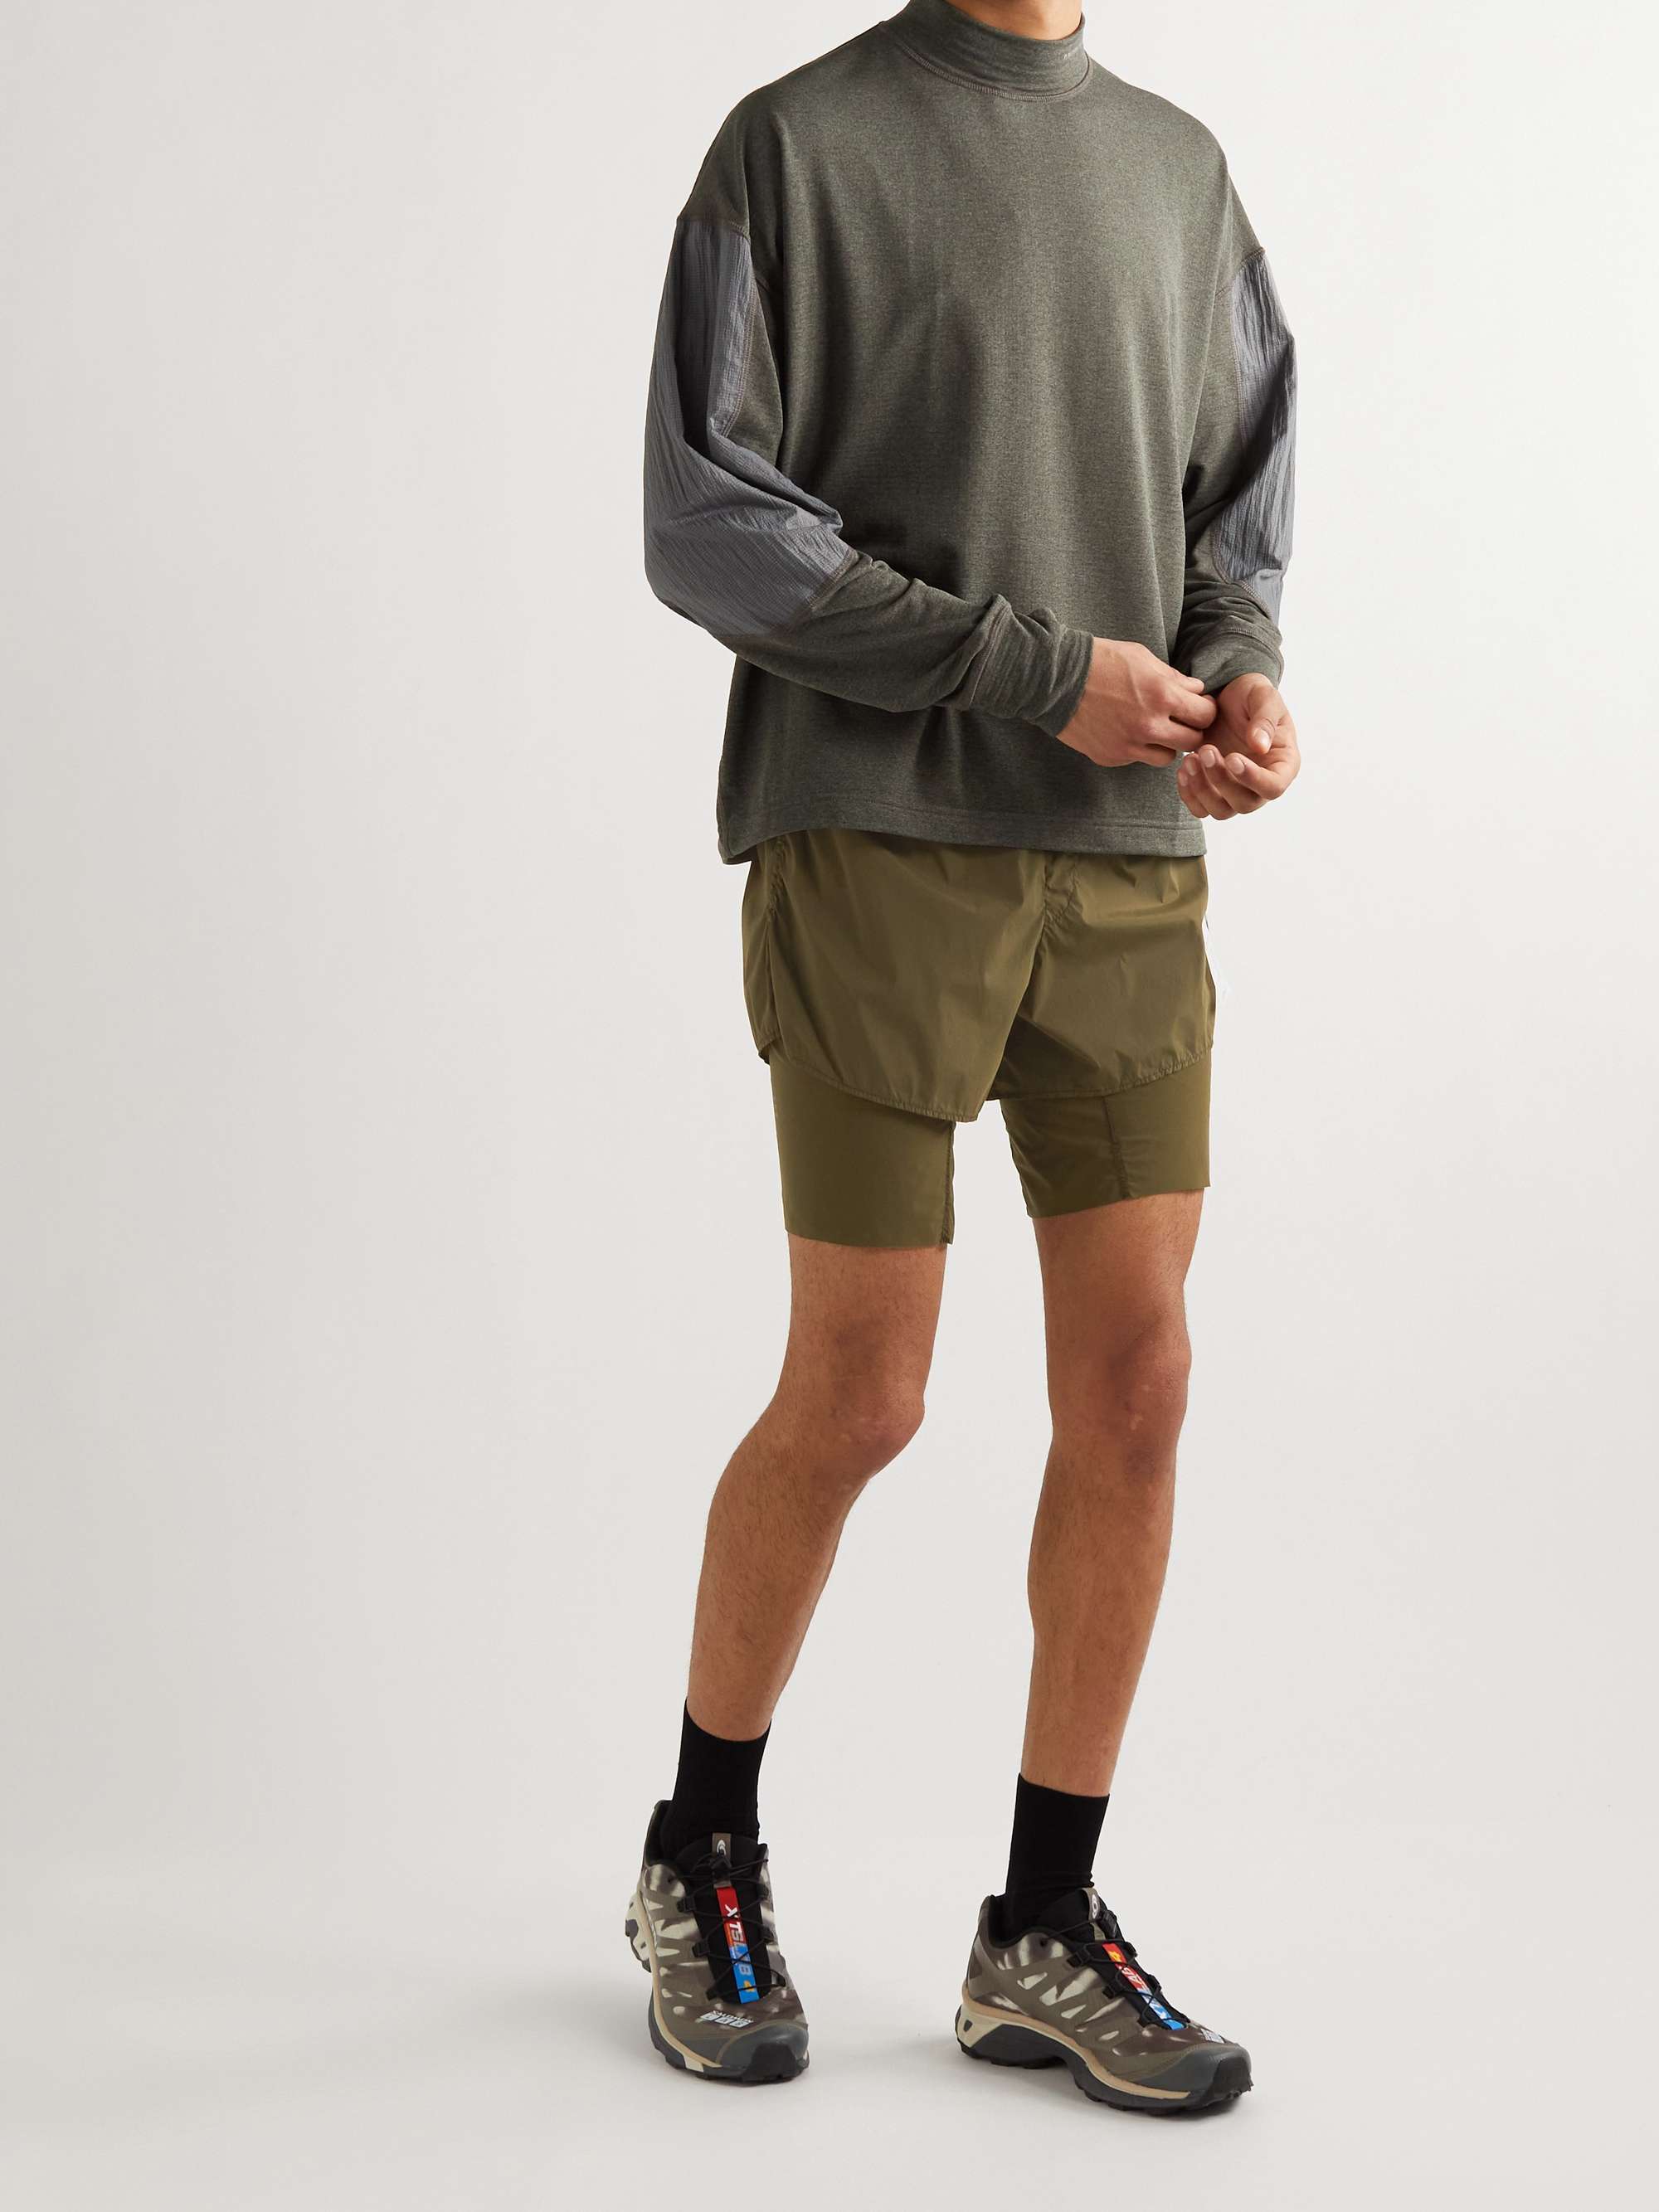 SATISFY Layered TechSilk and Justice Shorts